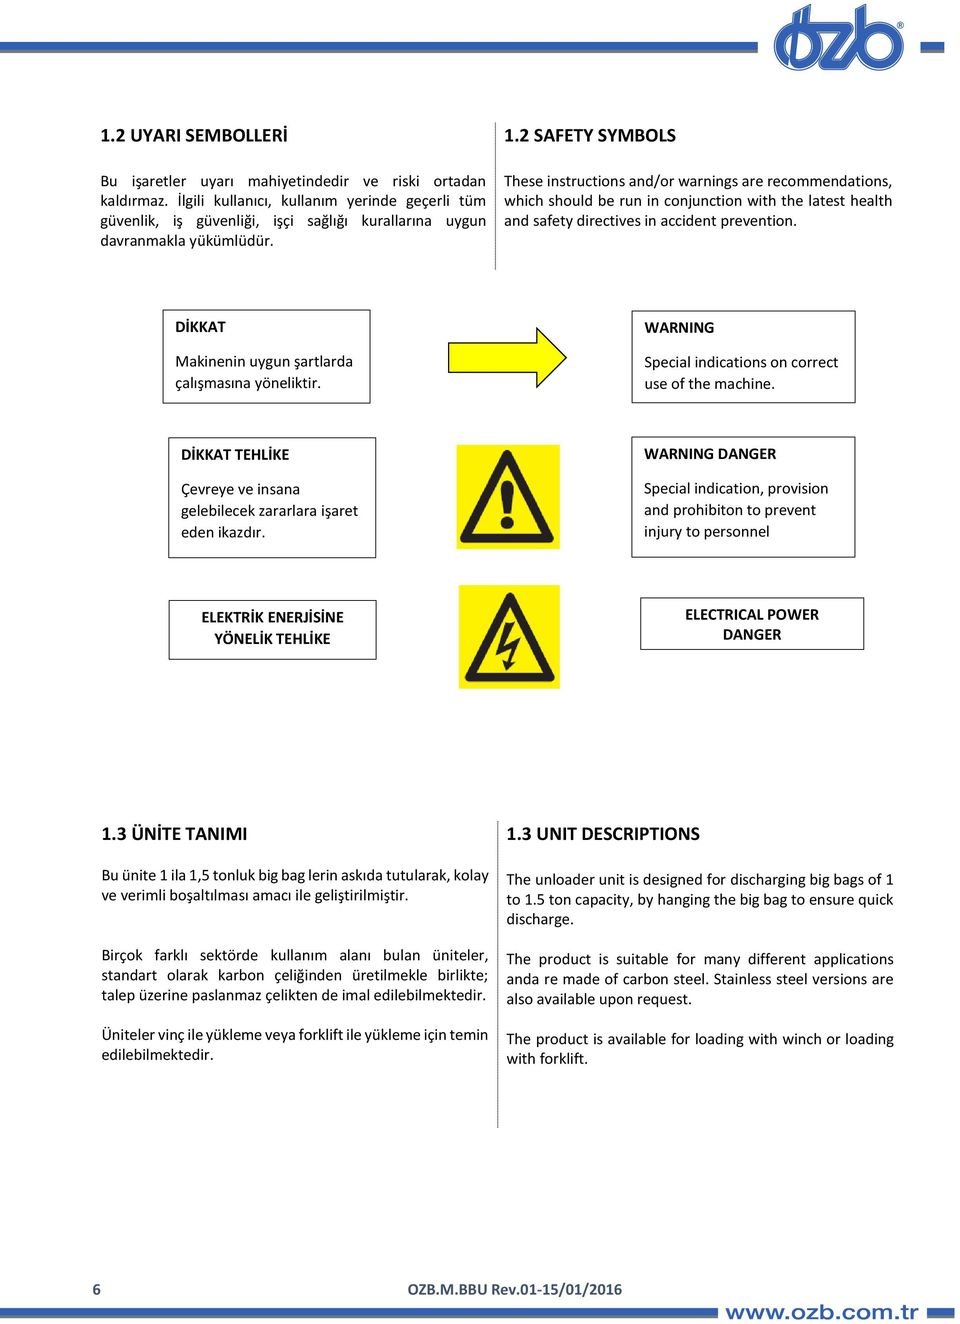 2 SAFETY SYMBOLS These instructions and/or warnings are recommendations, which should be run in conjunction with the latest health and safety directives in accident prevention.